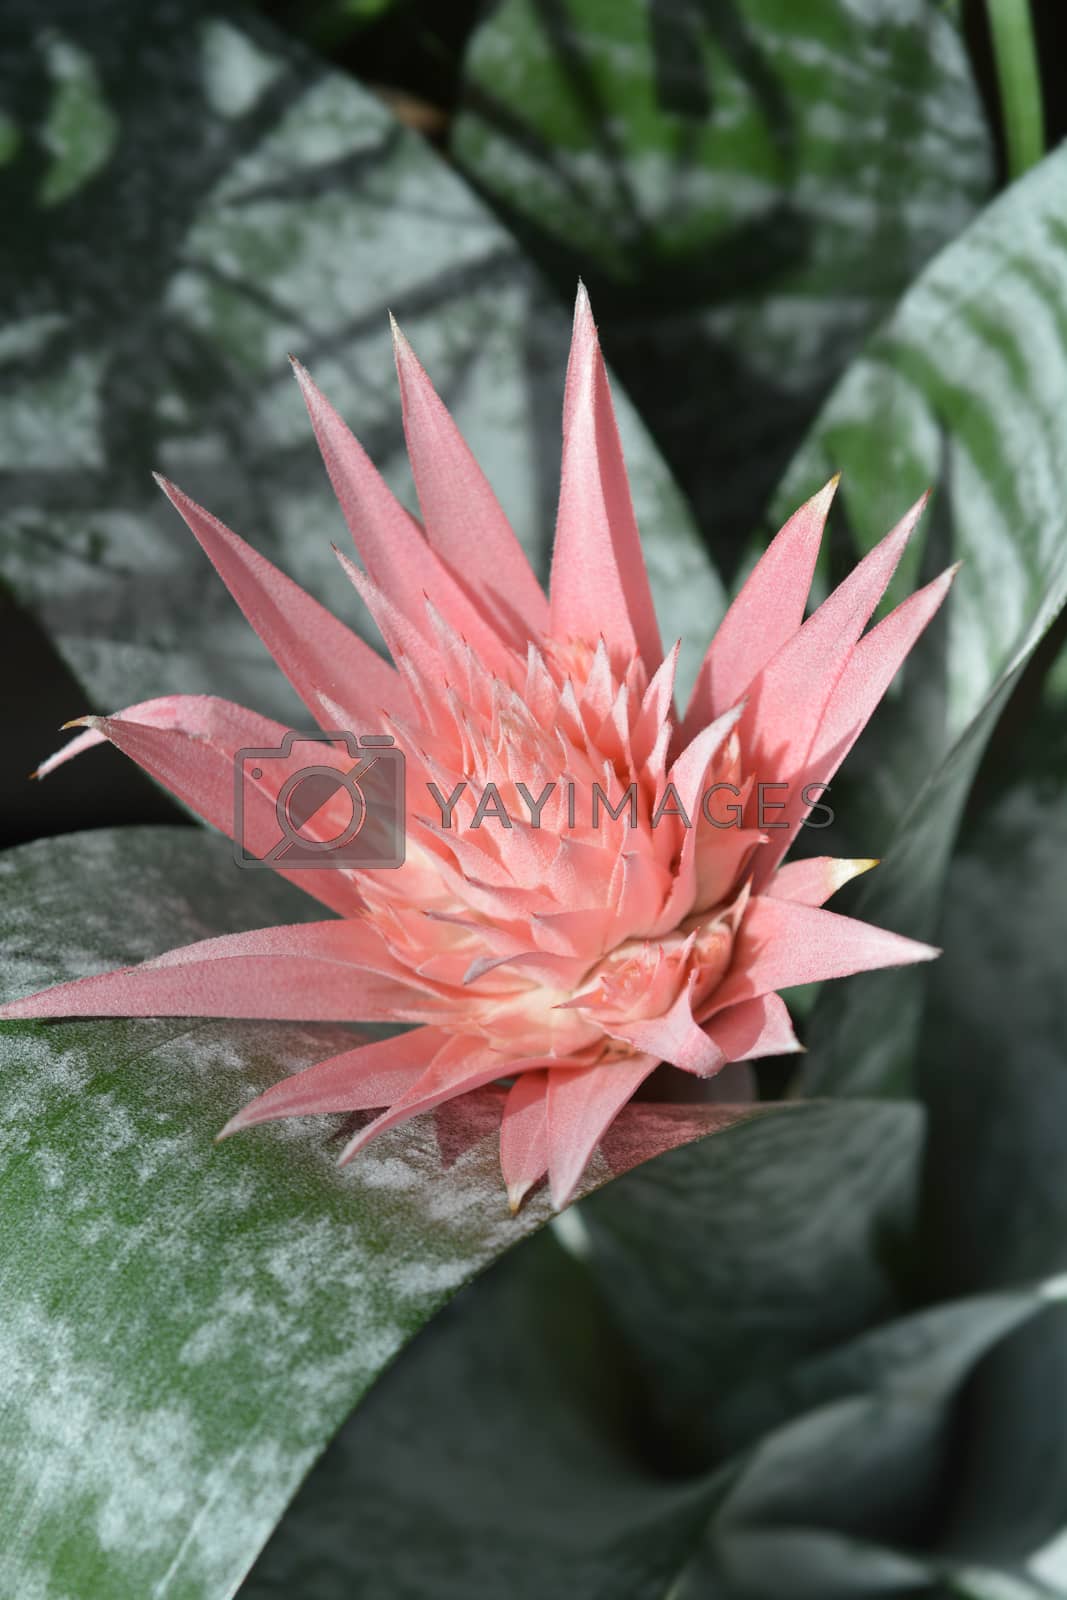 Royalty free image of Urn plant by nahhan